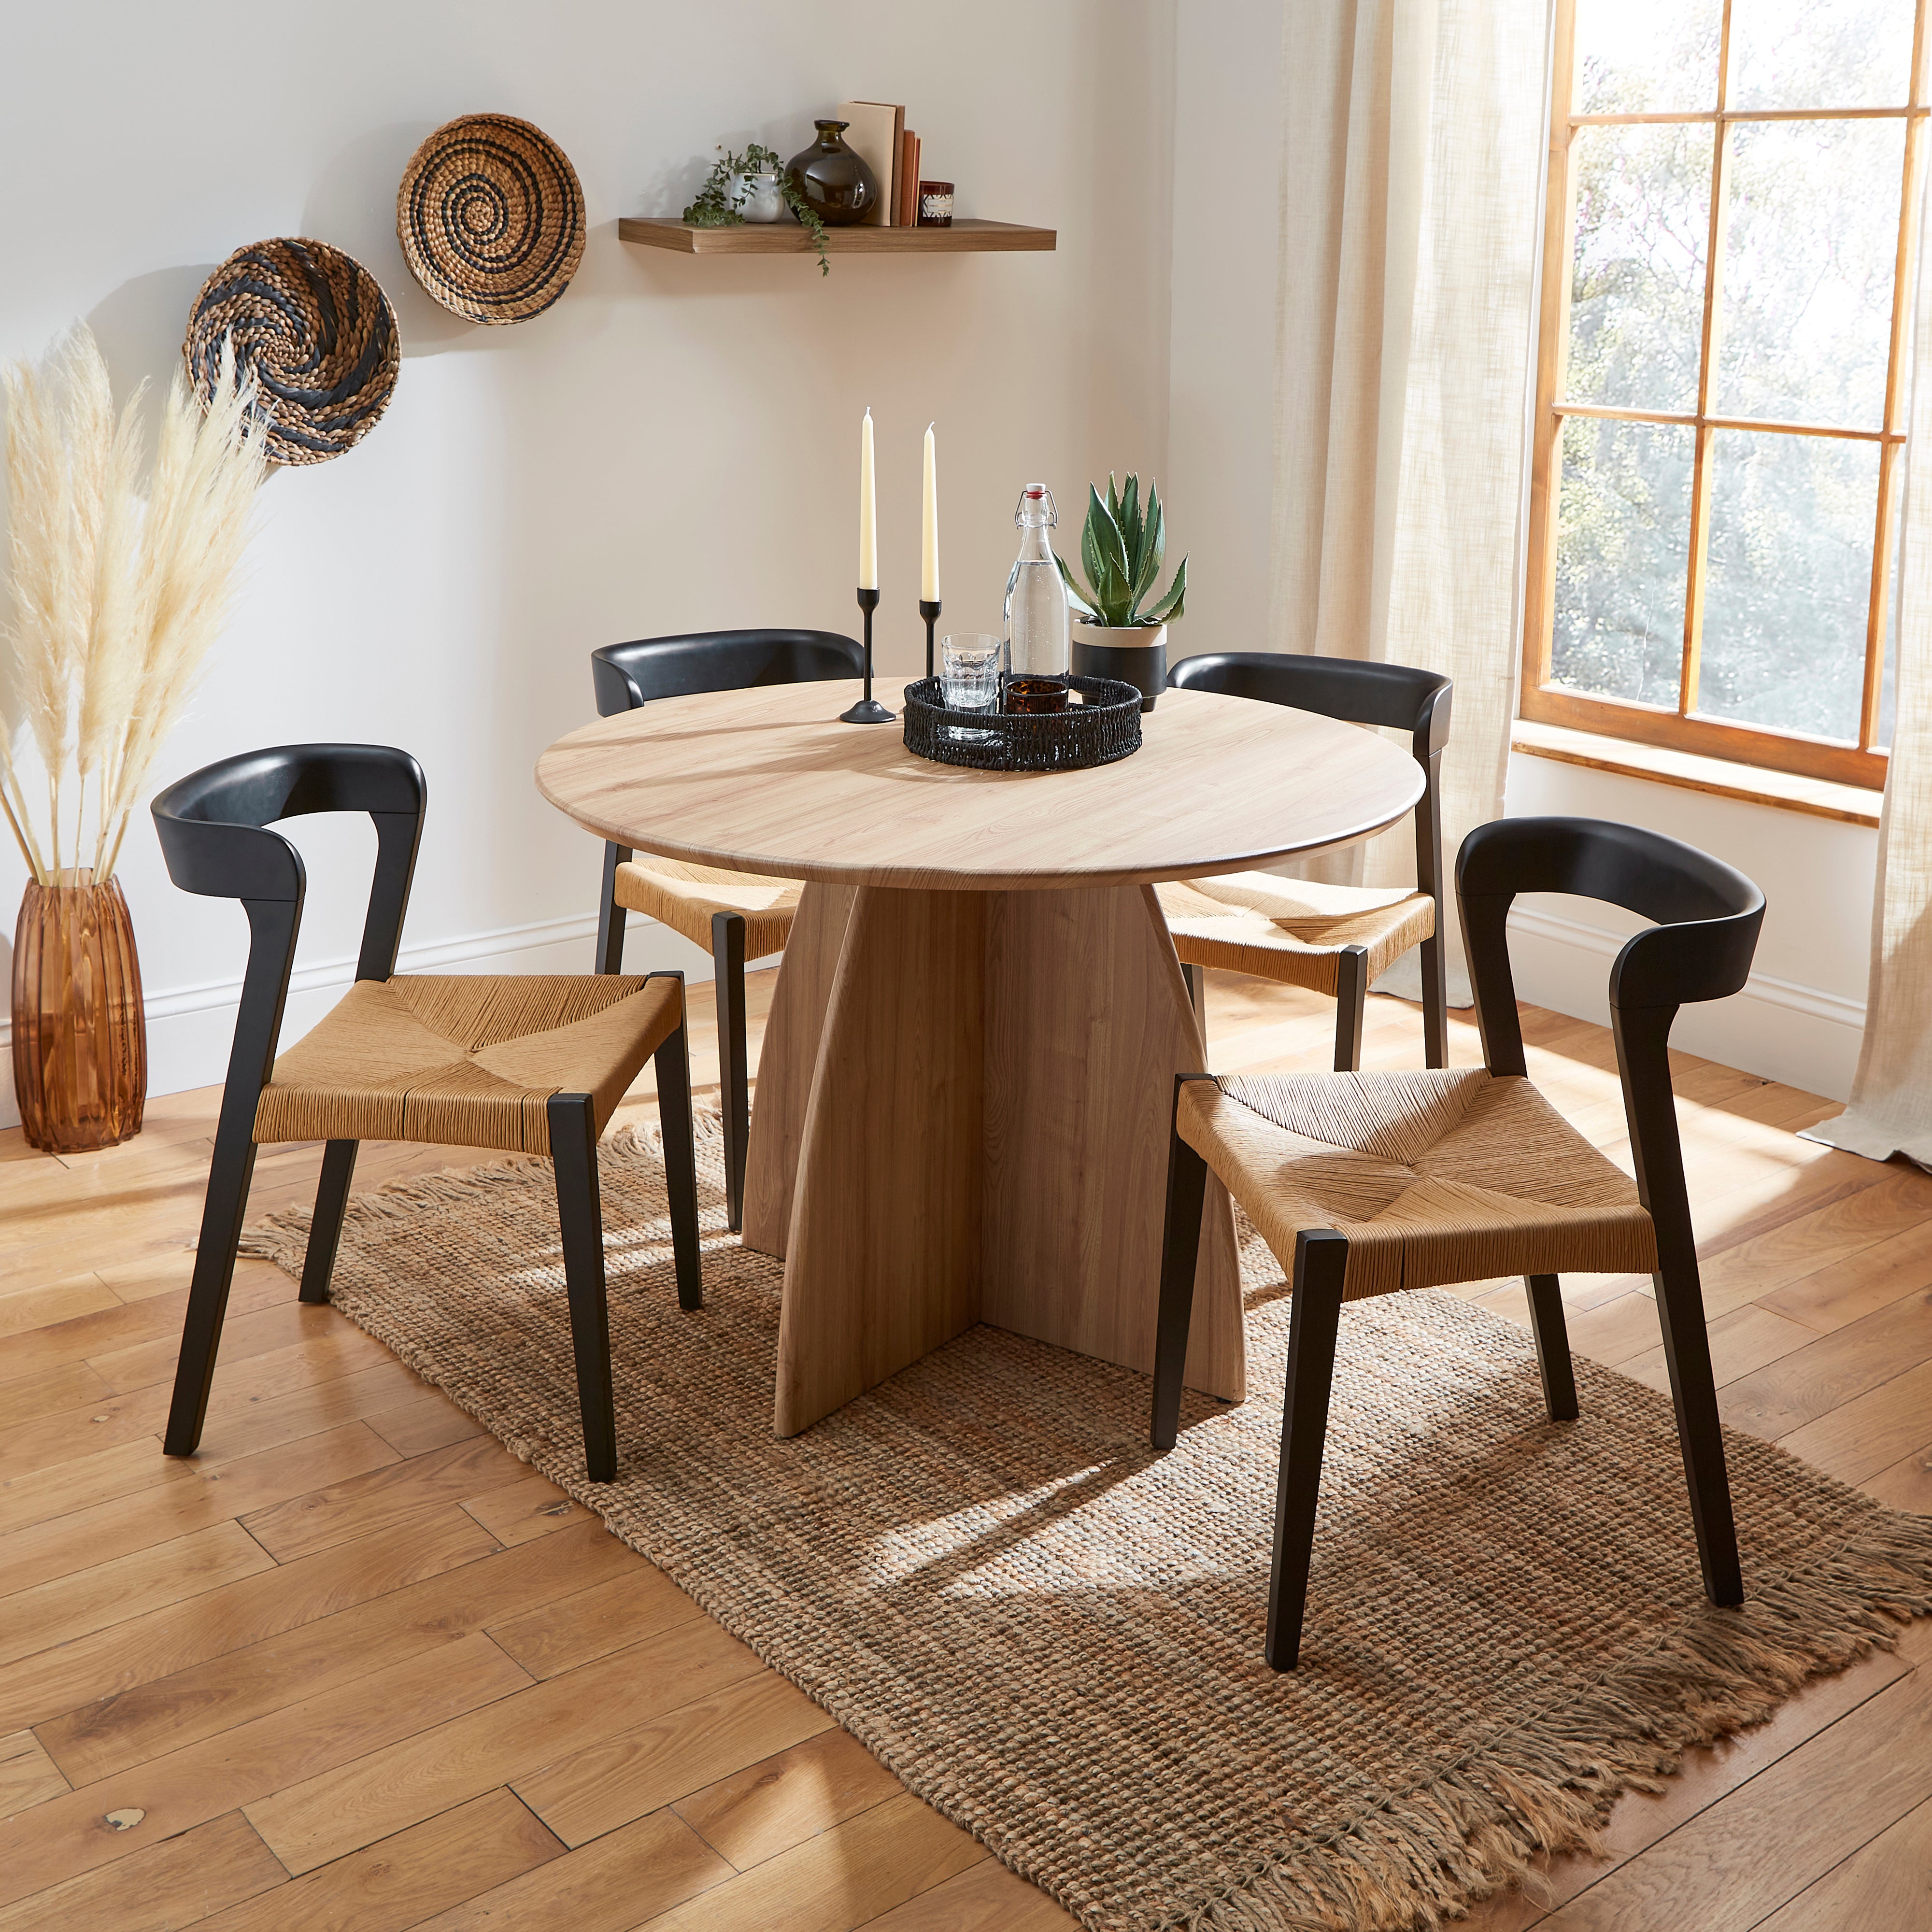 Effy 4 Seater Round Dining Table, Wood Effect